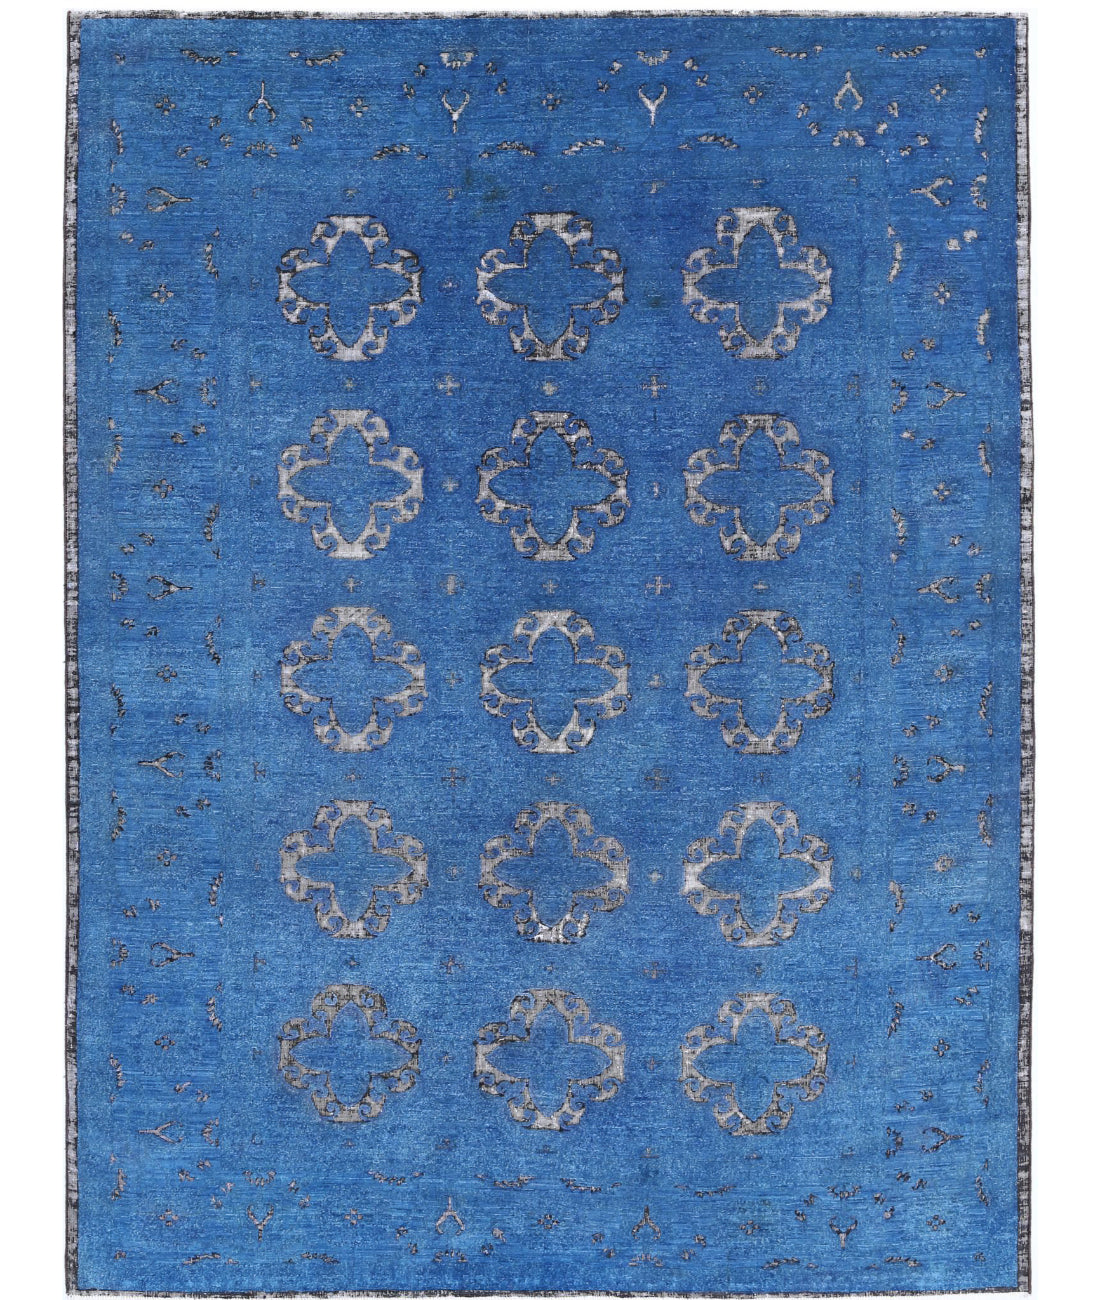 Hand Knotted Onyx Wool Rug - 6'5'' x 8'1'' 6'5'' x 8'1'' (193 X 243) / Blue / Blue